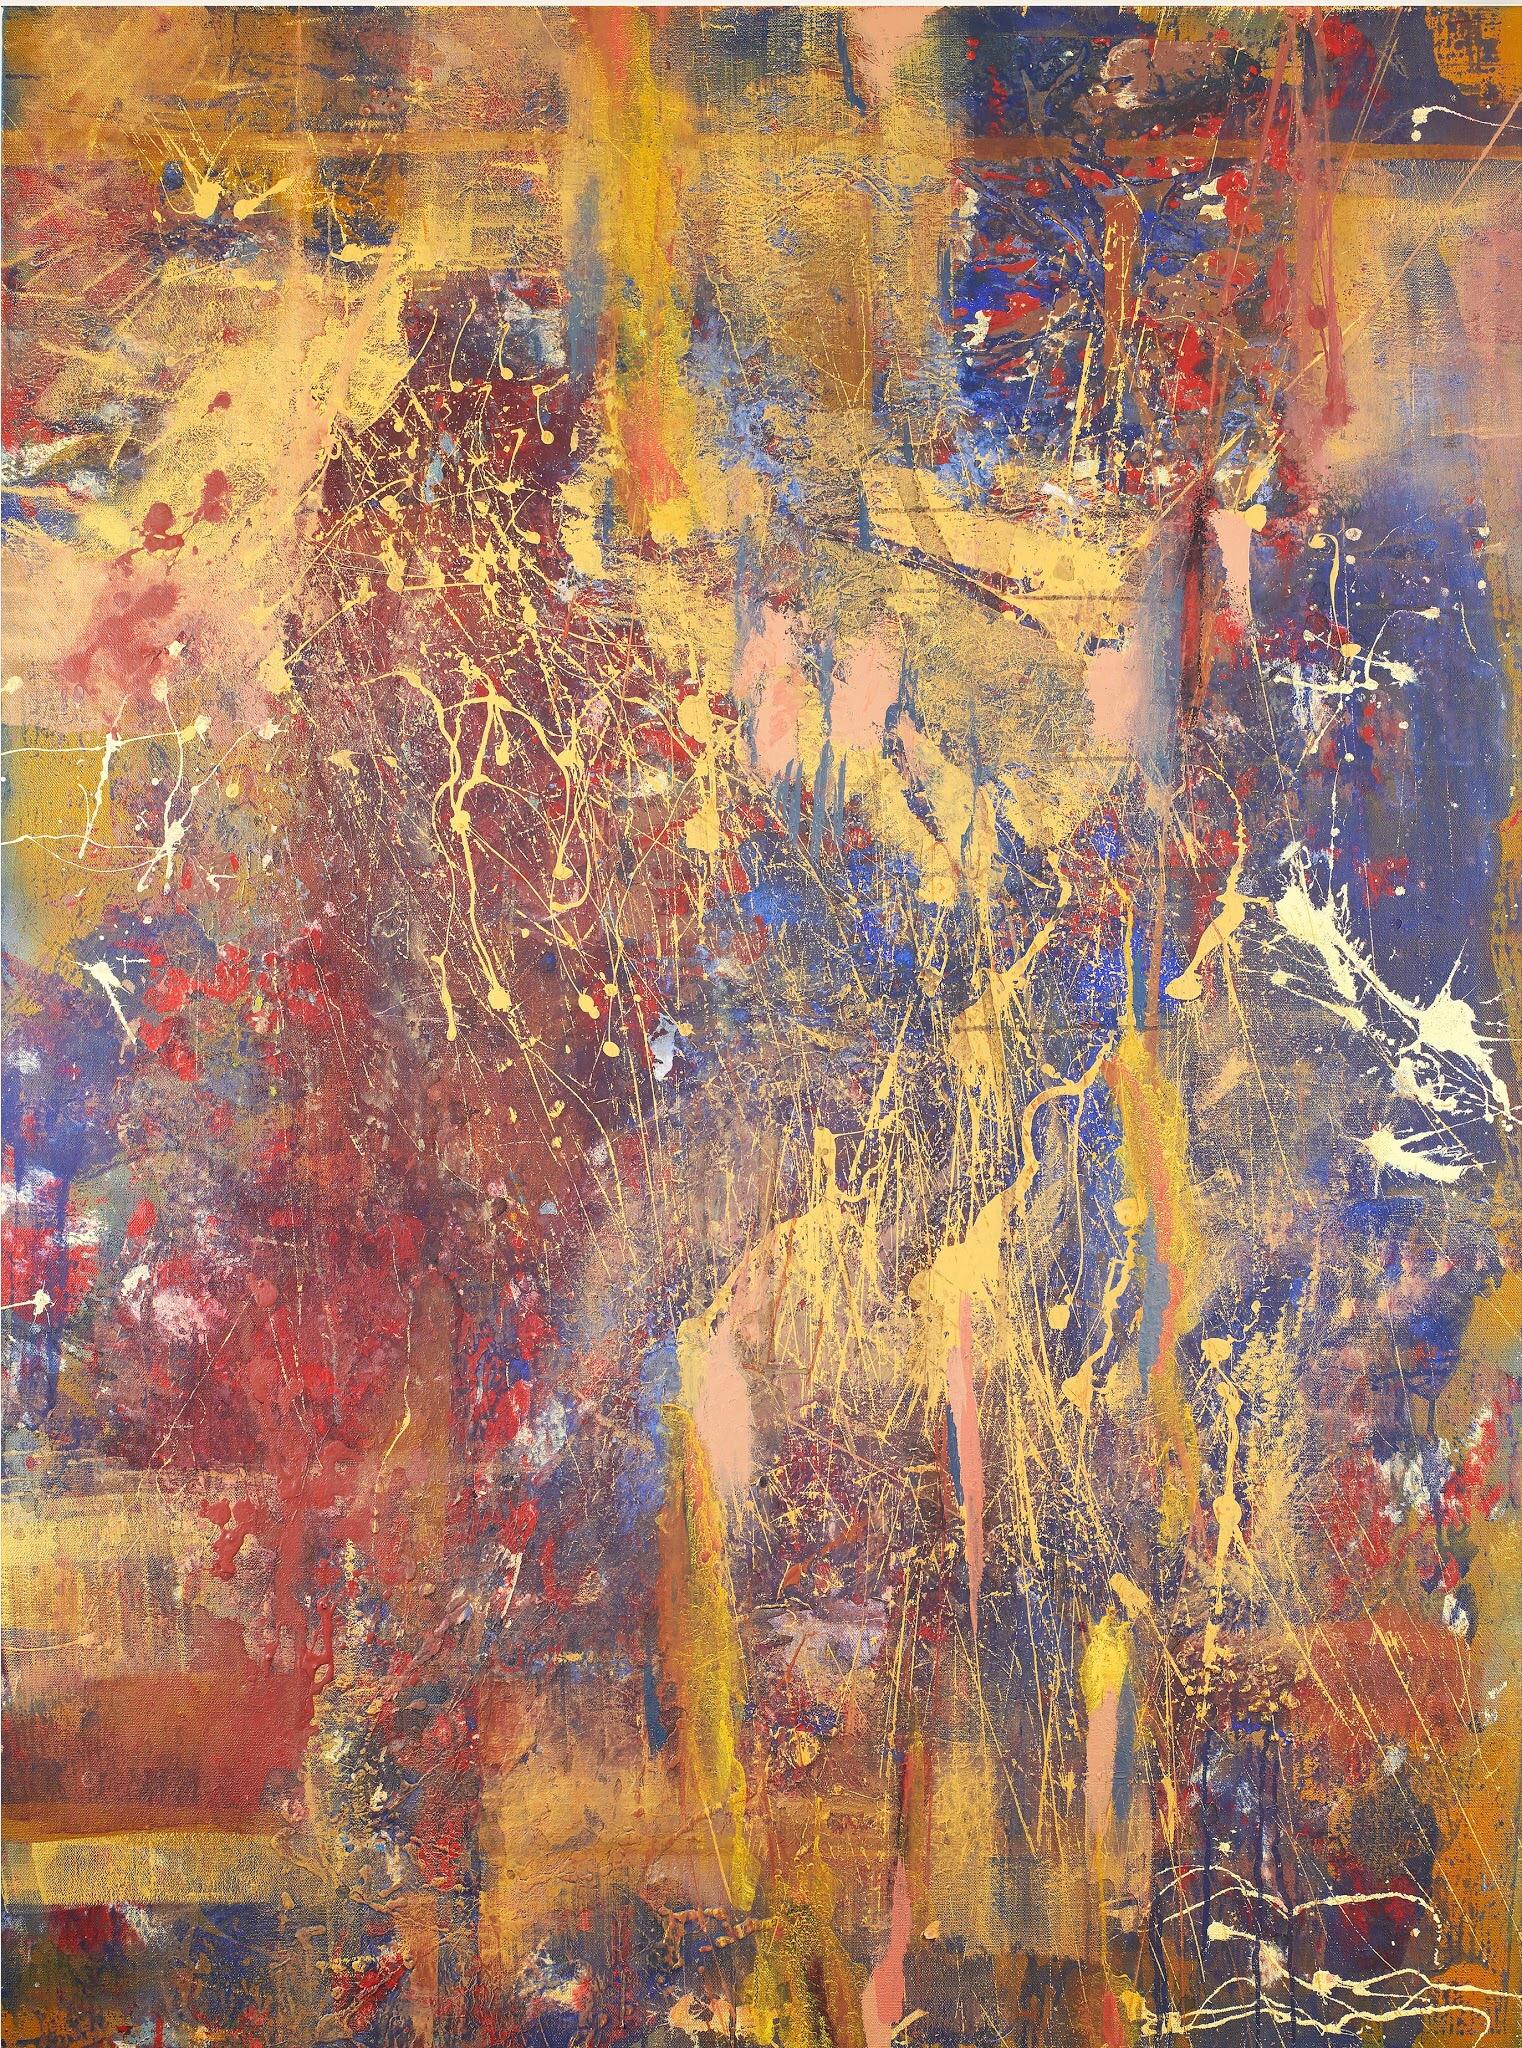 Jennifer Blalack Landscape Painting - Safari - Stunning Abstract Painting with Drip, Splattered, (Red+Blue+Gold) 